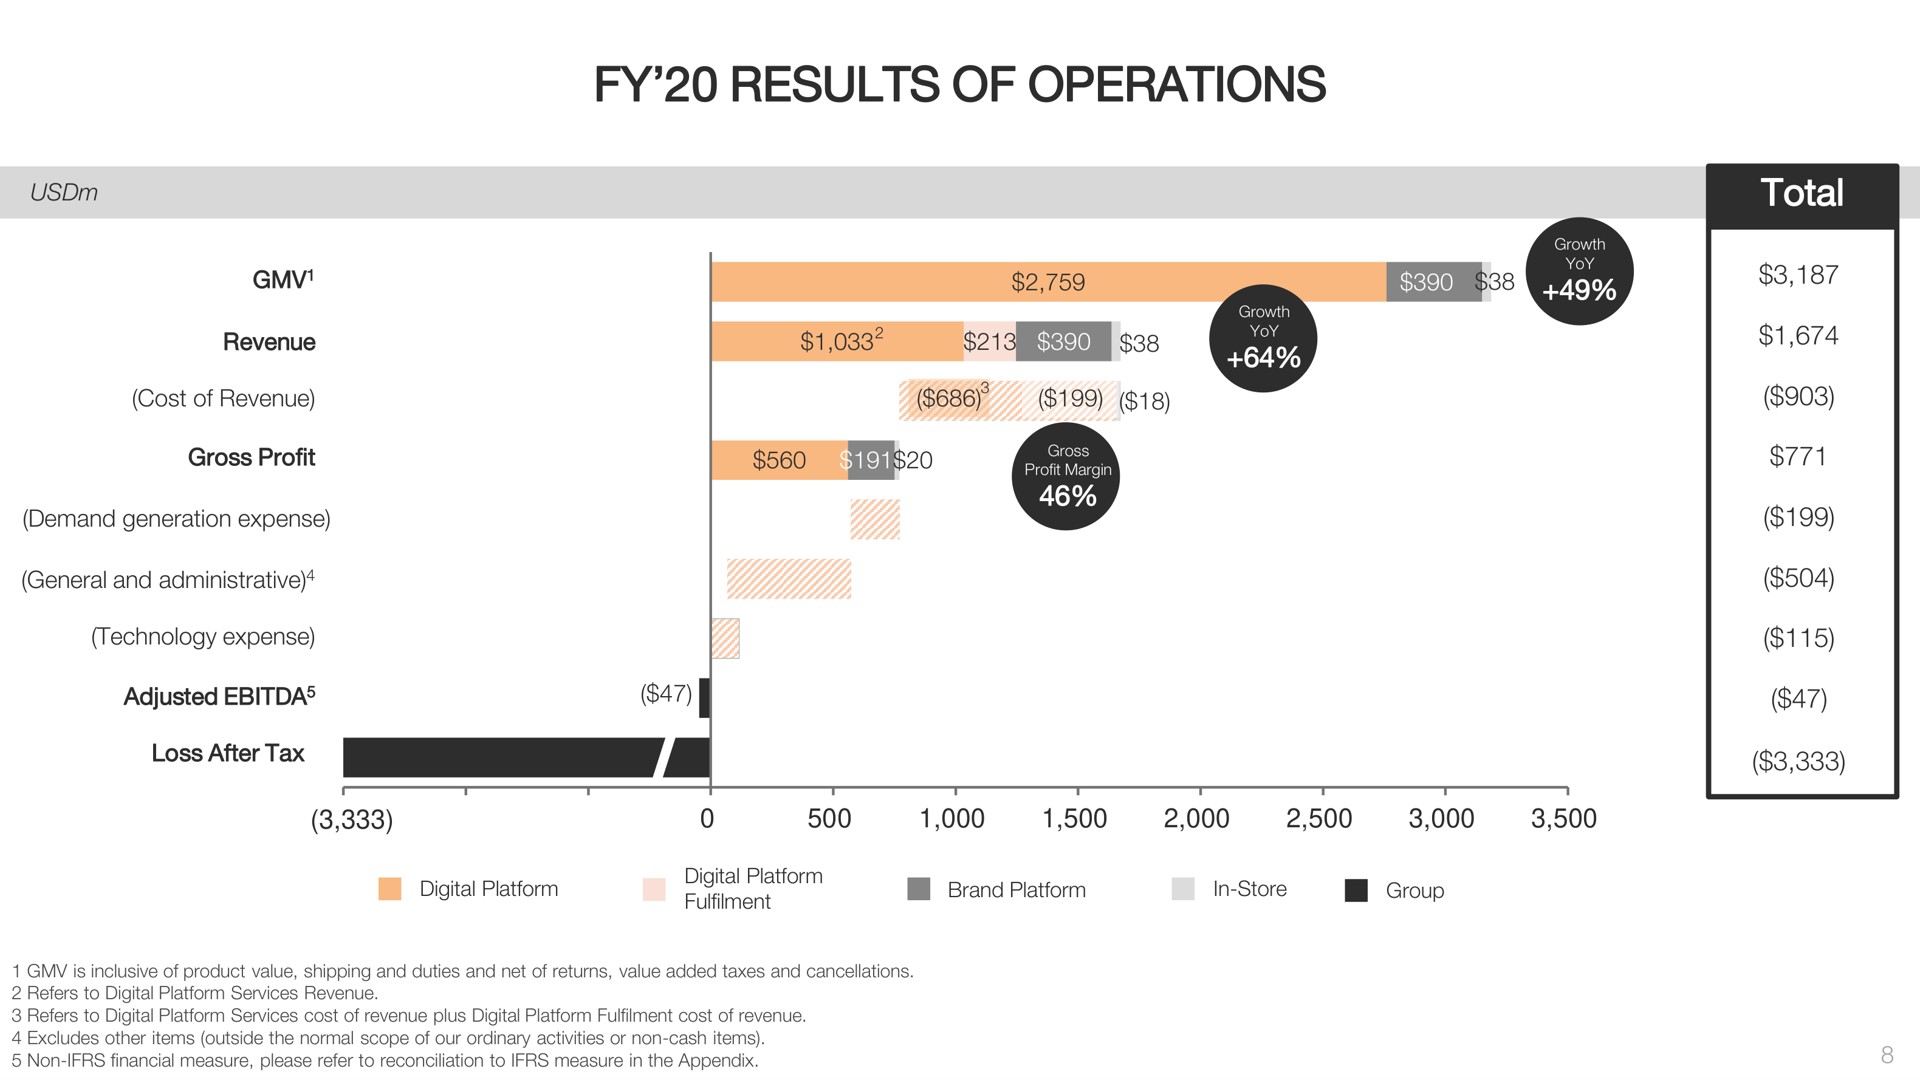 results of operations total | Farfetch